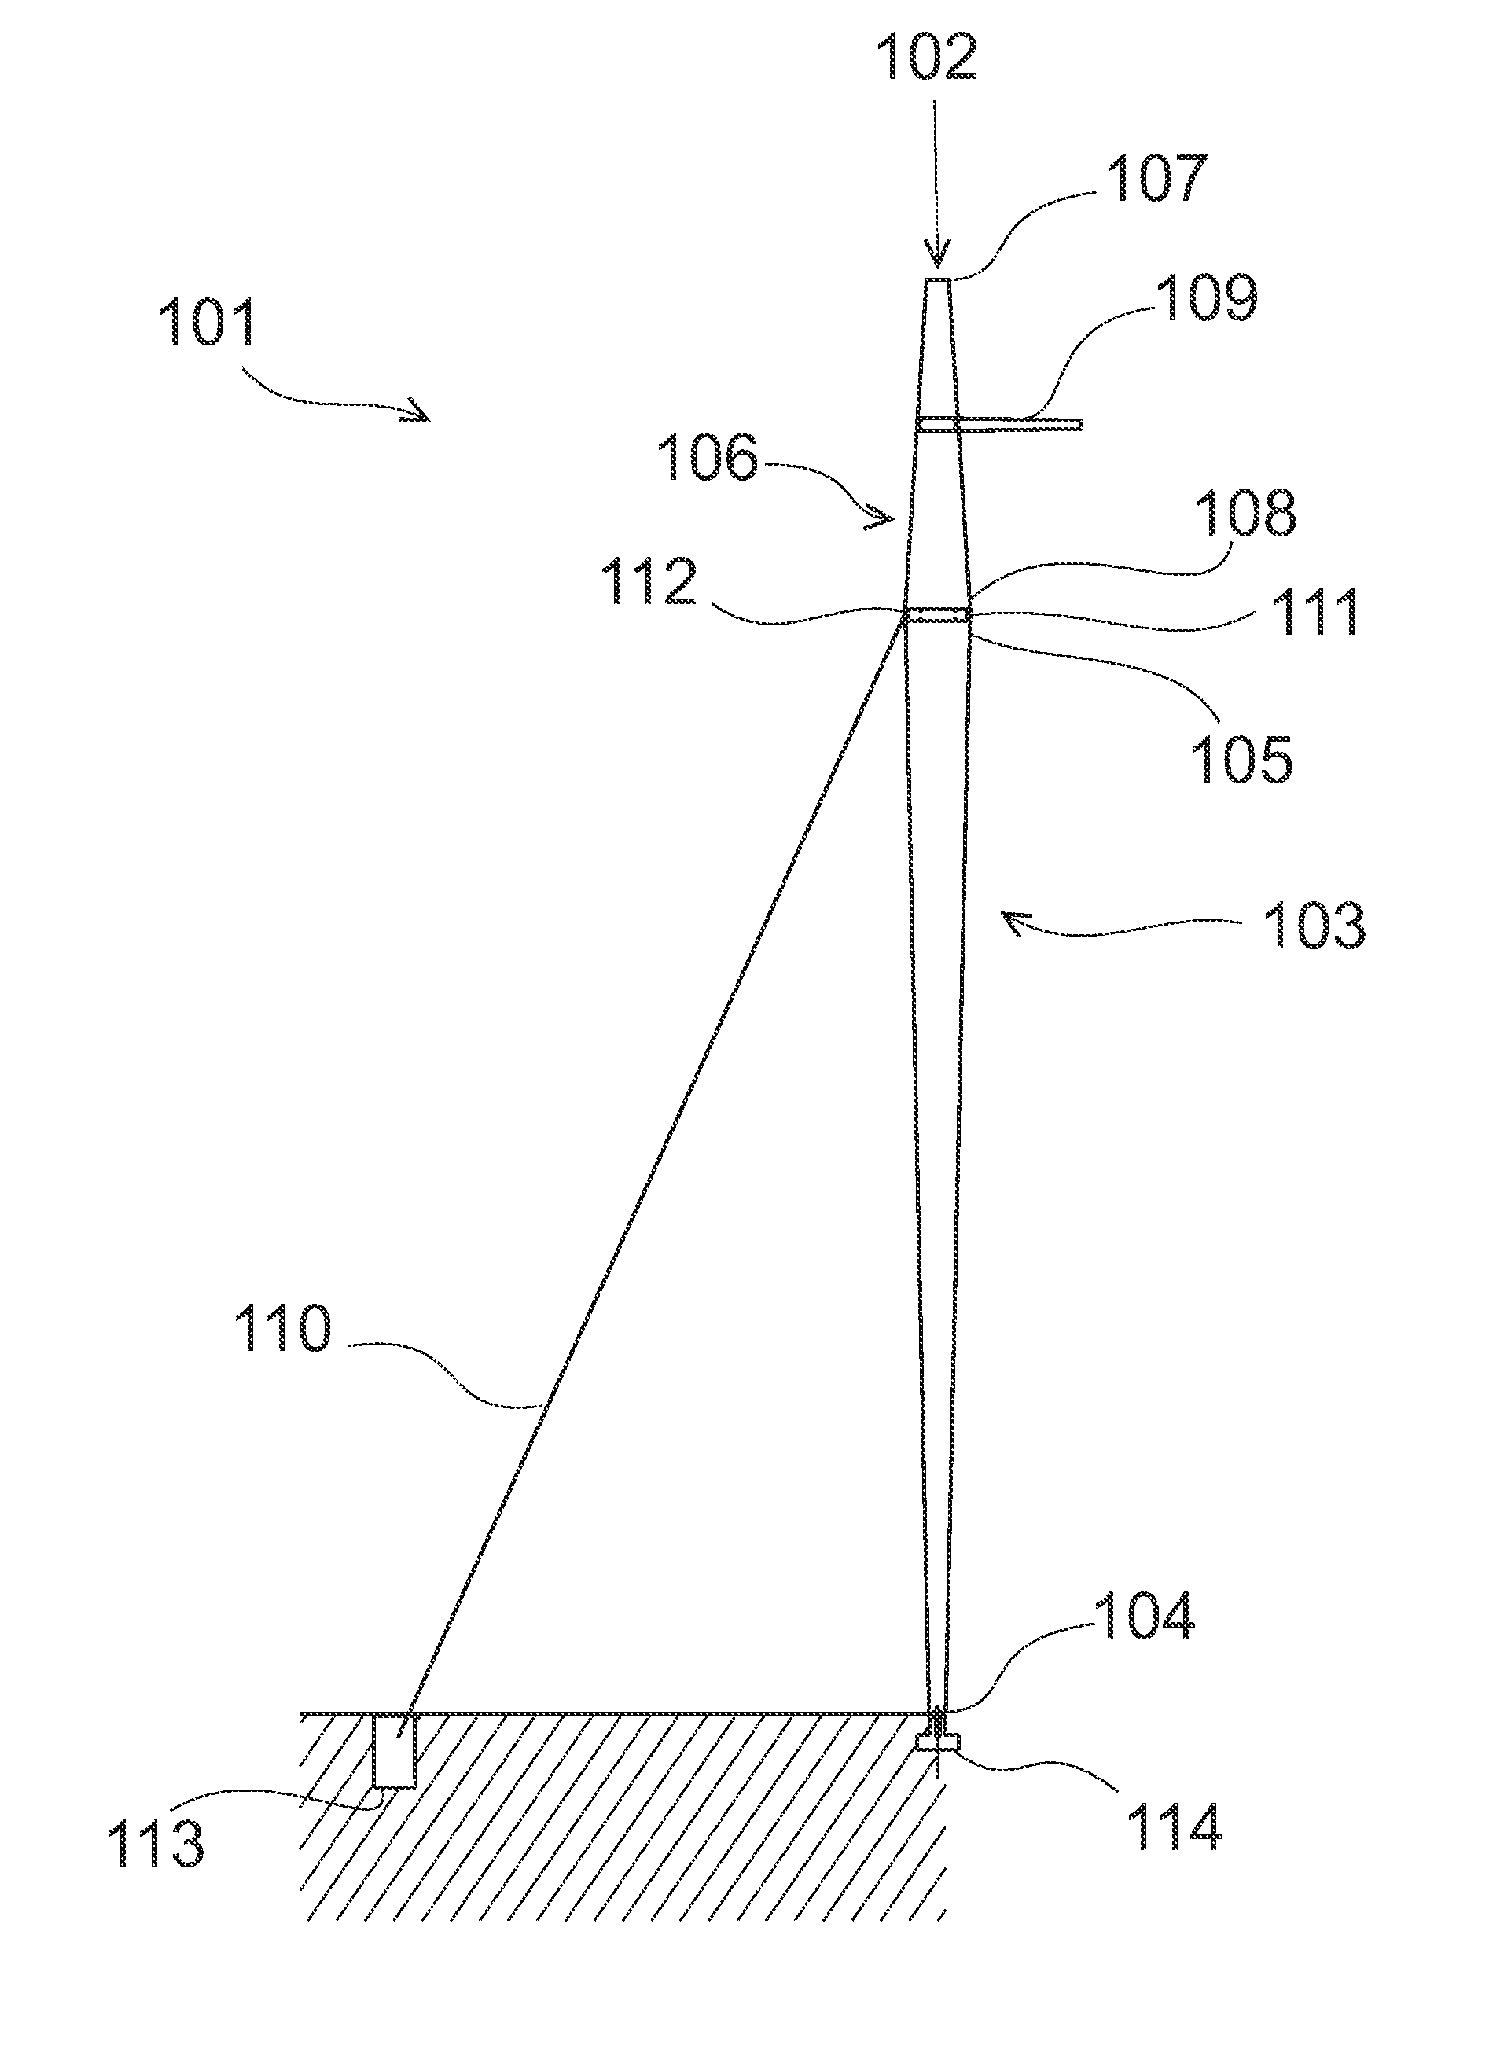 Structure for supporting electric power transmission lines